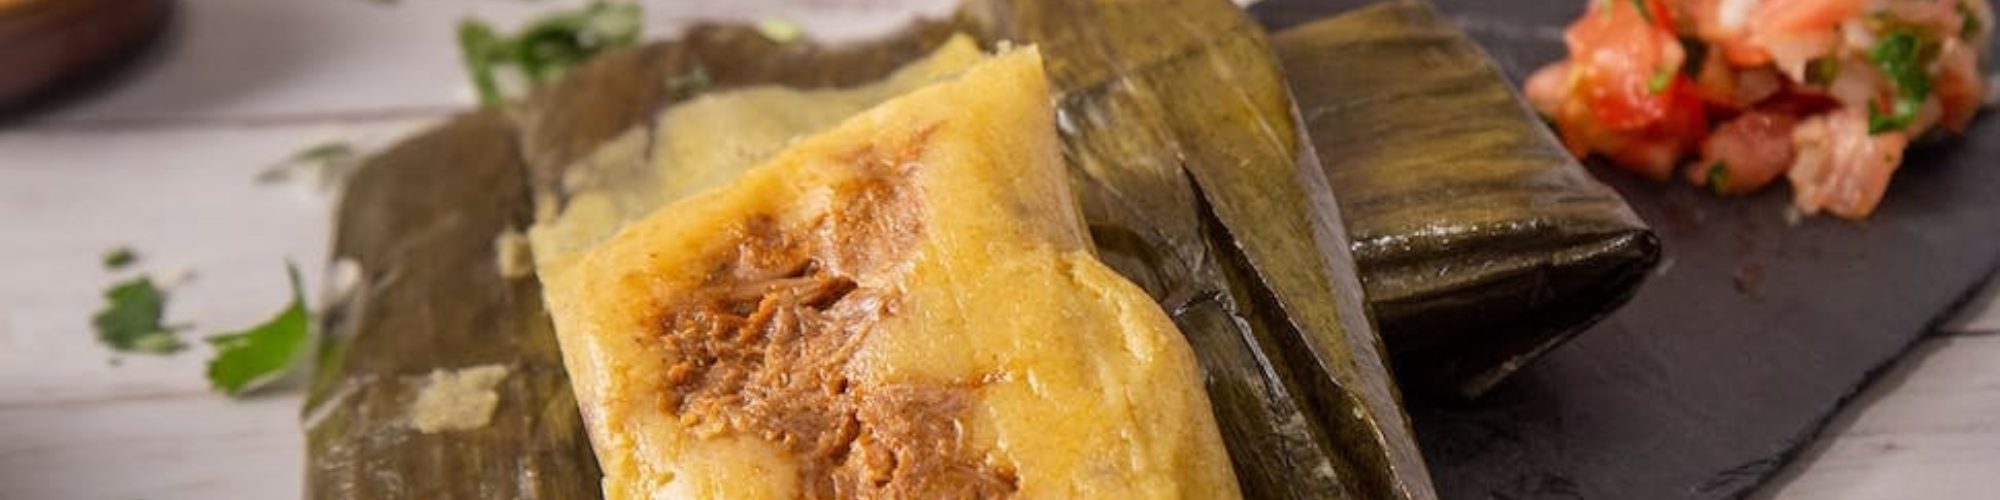 Tamale Mexican Cooking Class In Denver